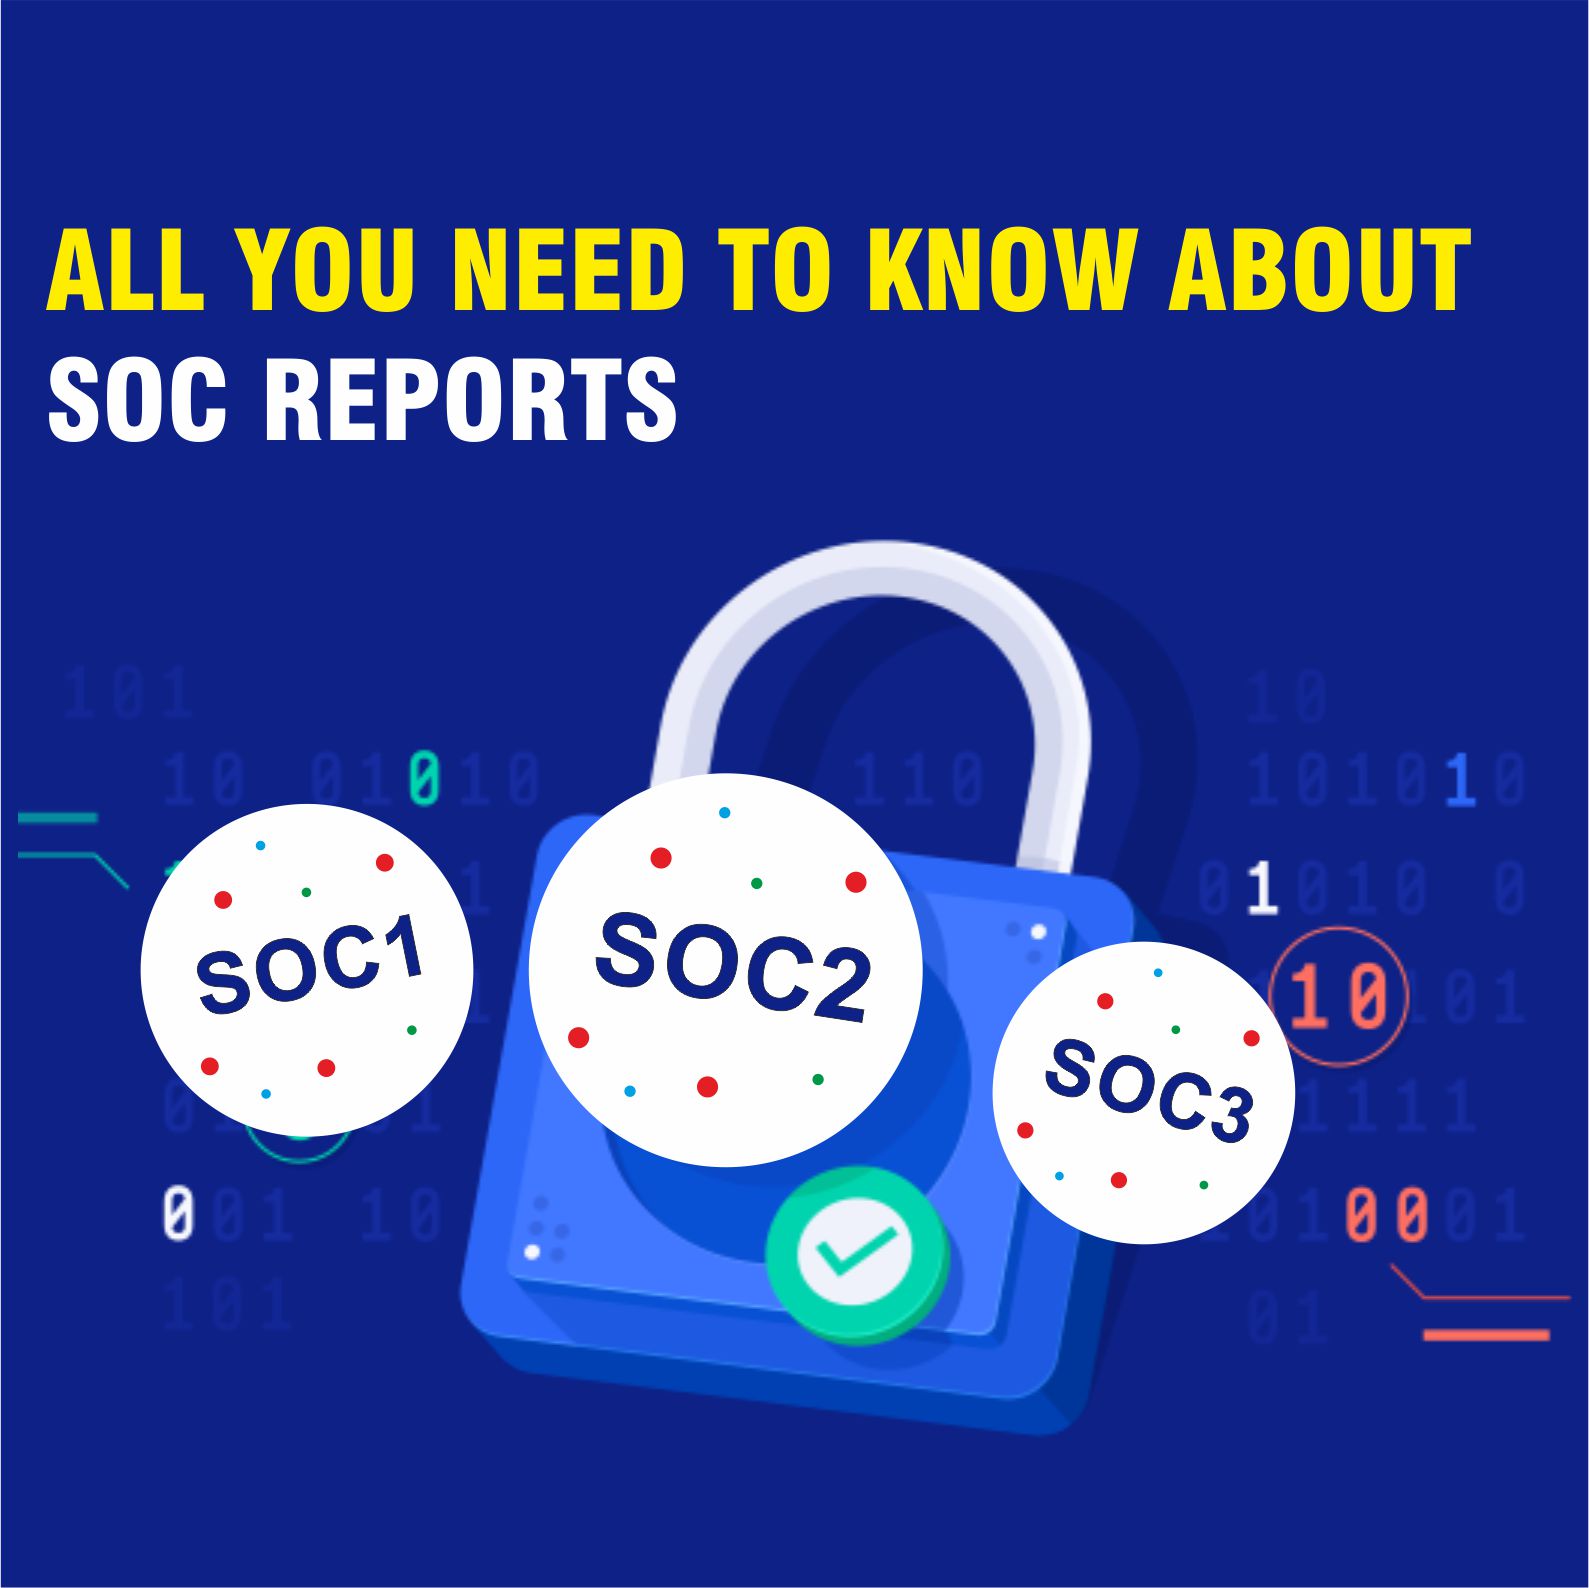 All You Need to Know about SOC Reports